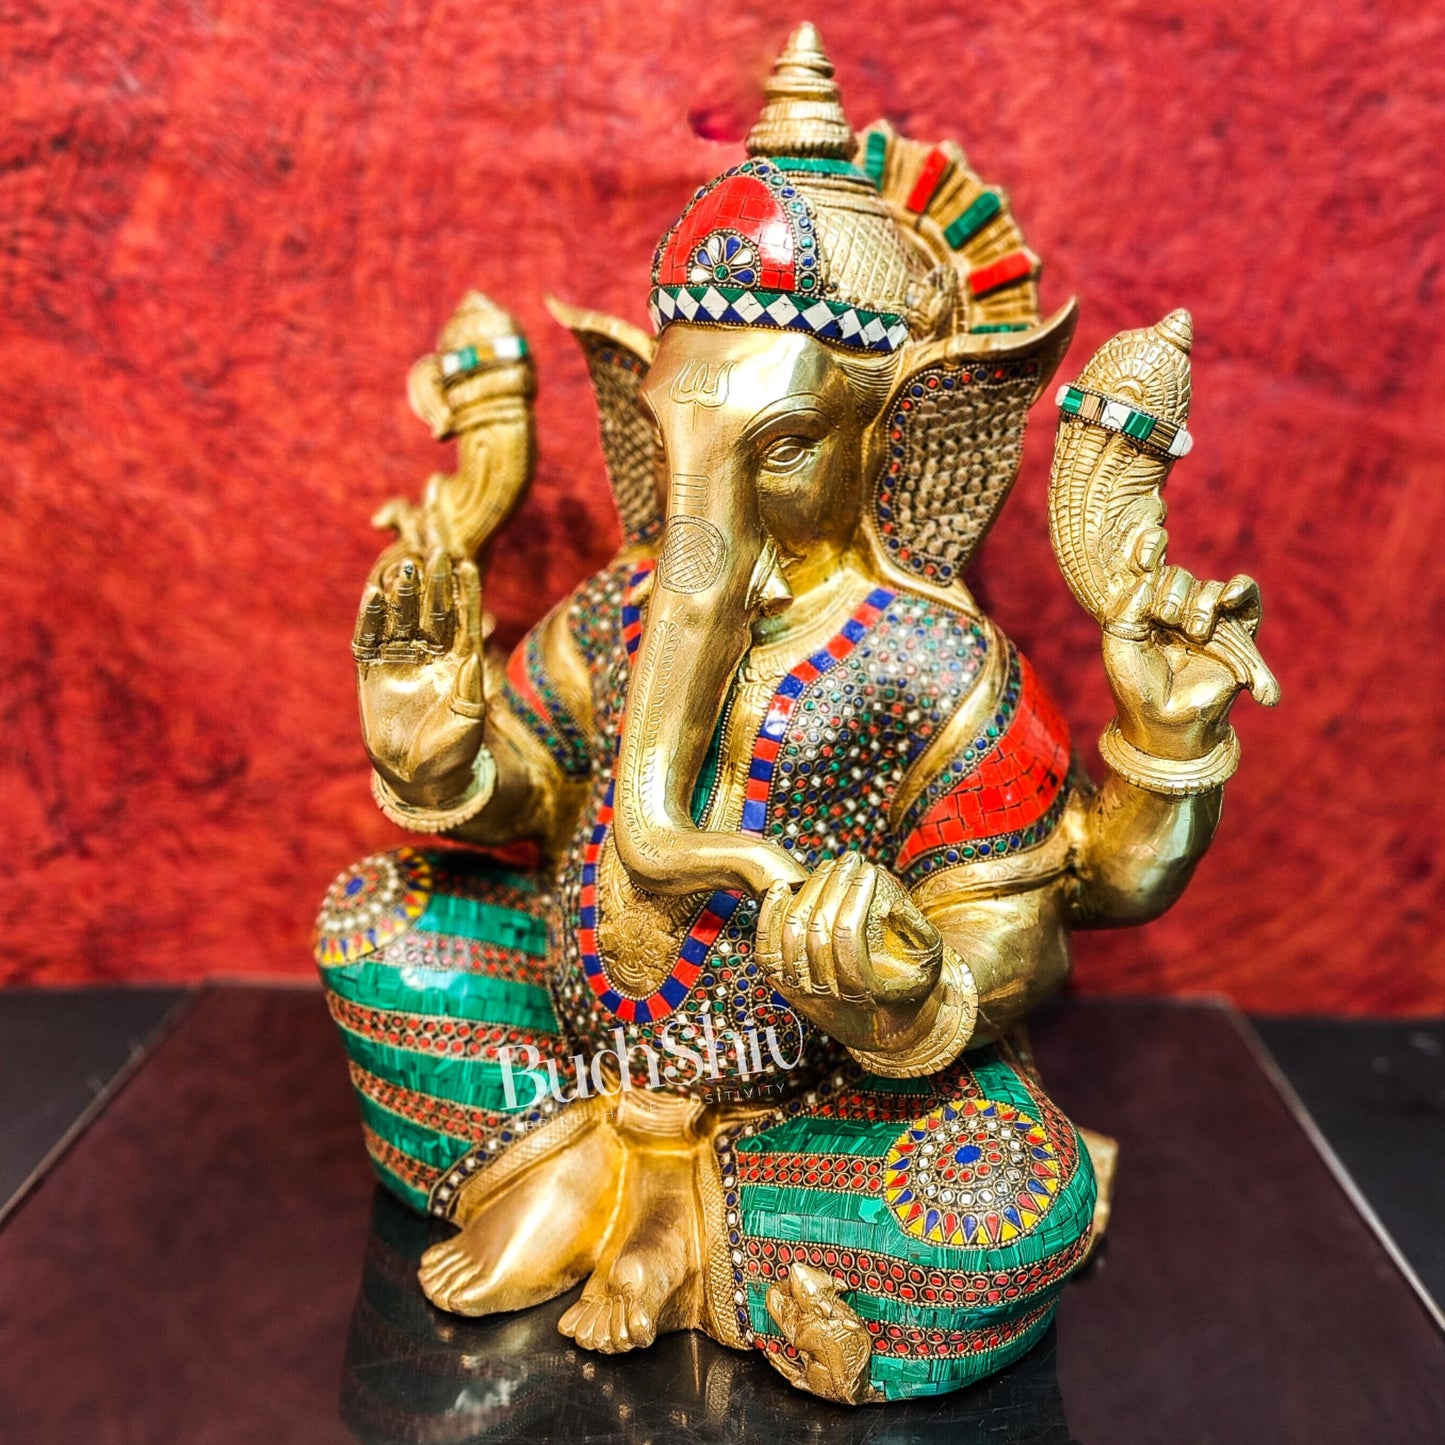 Pure Brass Handcrafted Ganesha Idol with Stonework | Height 20 inches | Blessing Posture - Budhshiv.com